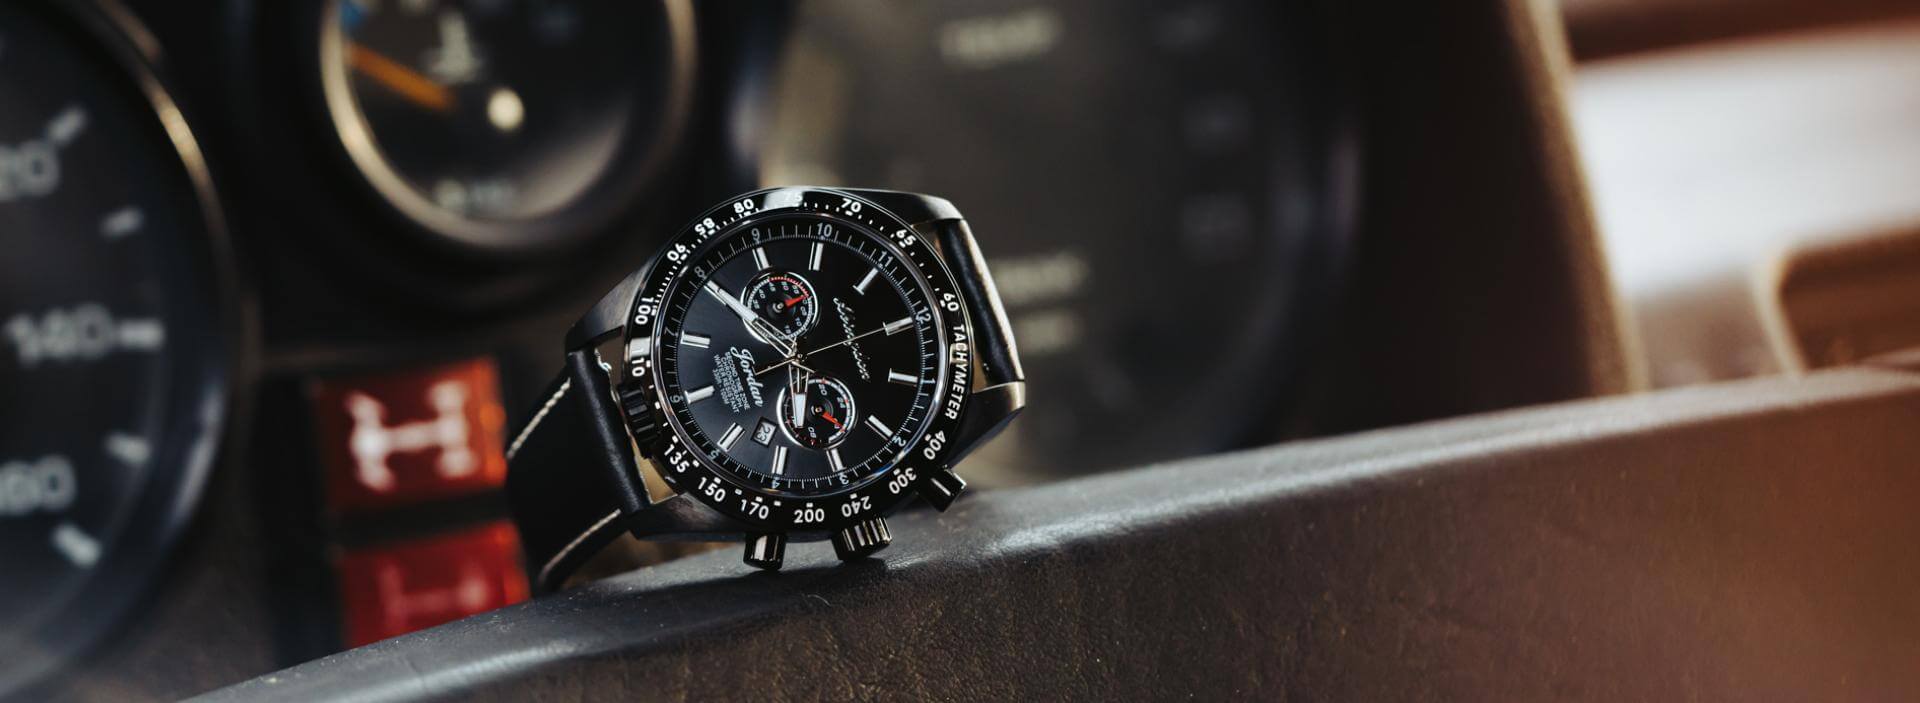 Speed and Performance Define Latest Automotive Watch Released by Adventurous Women's Watch Company for Women's History Month